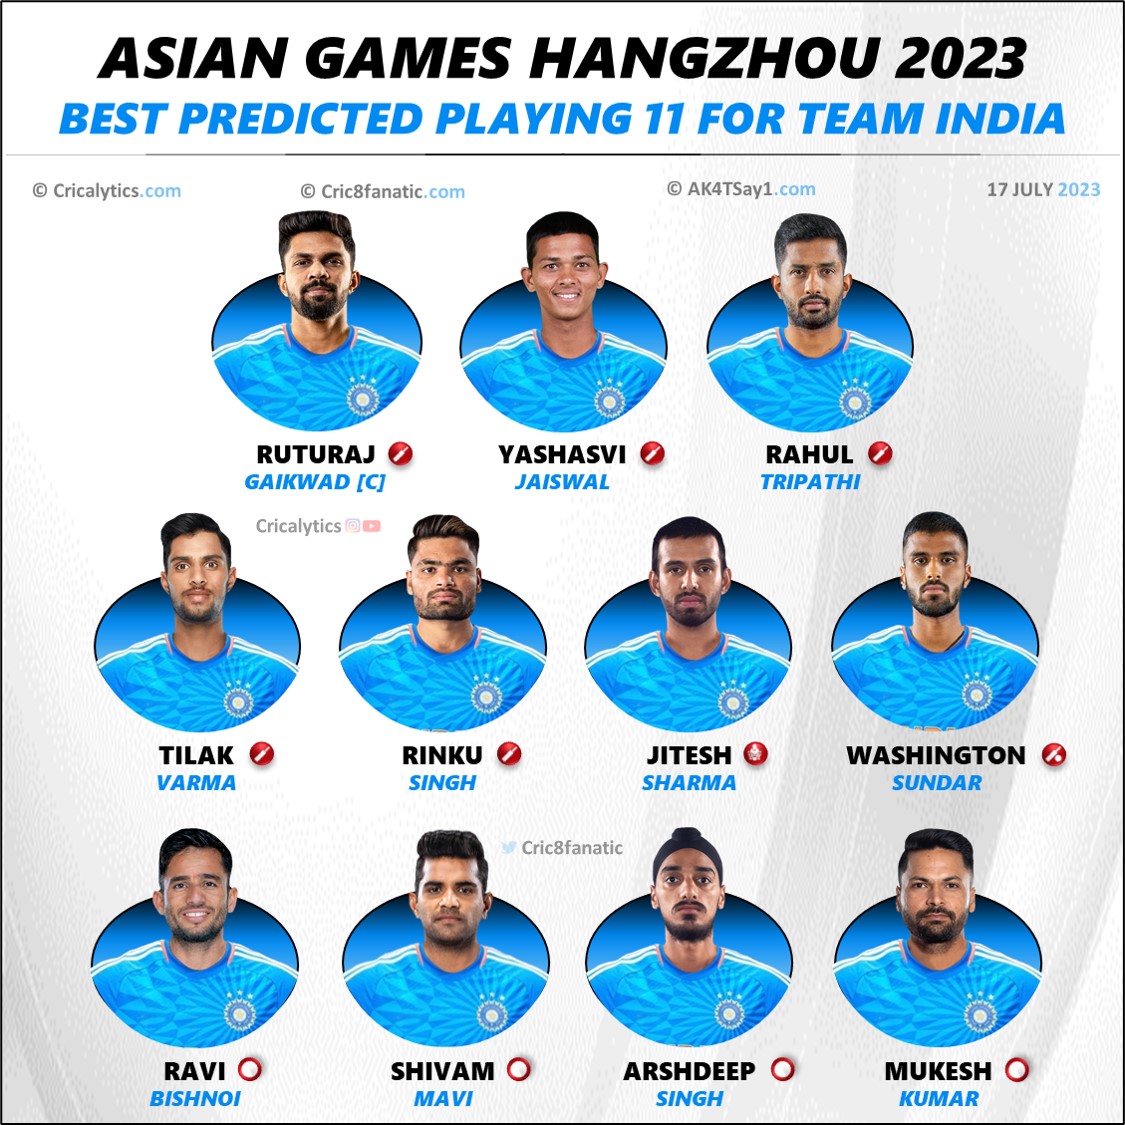 Asian Games 2023 Best Predicted Playing 11 for Team India